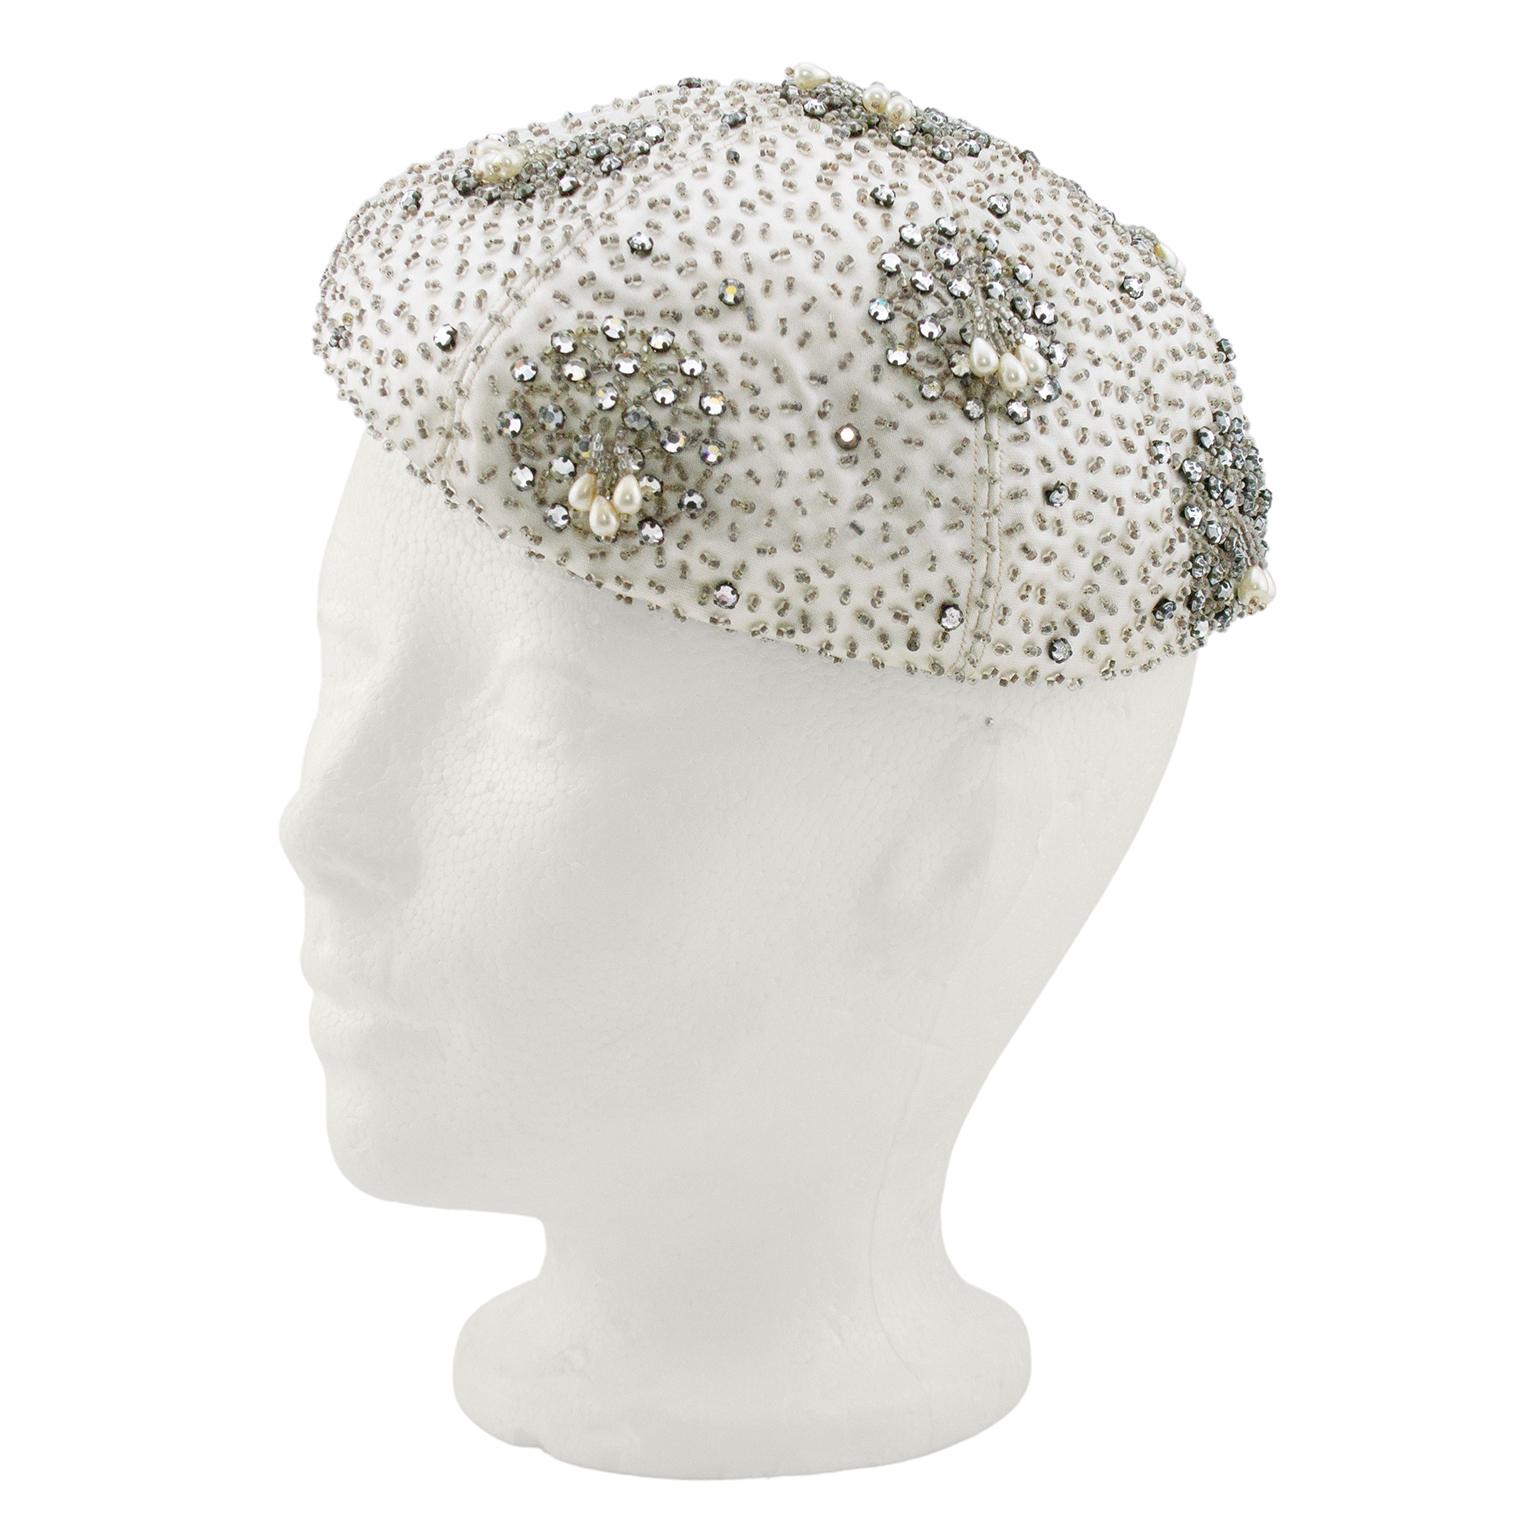 Fabulous 1950s silver beret. Embellished off-white satin fabric  with small clear beads and silver rhinestones. Small beaded tassels with teardrop shaped pearls. Contrasting interior magenta grosgrain ribbon. 22.5